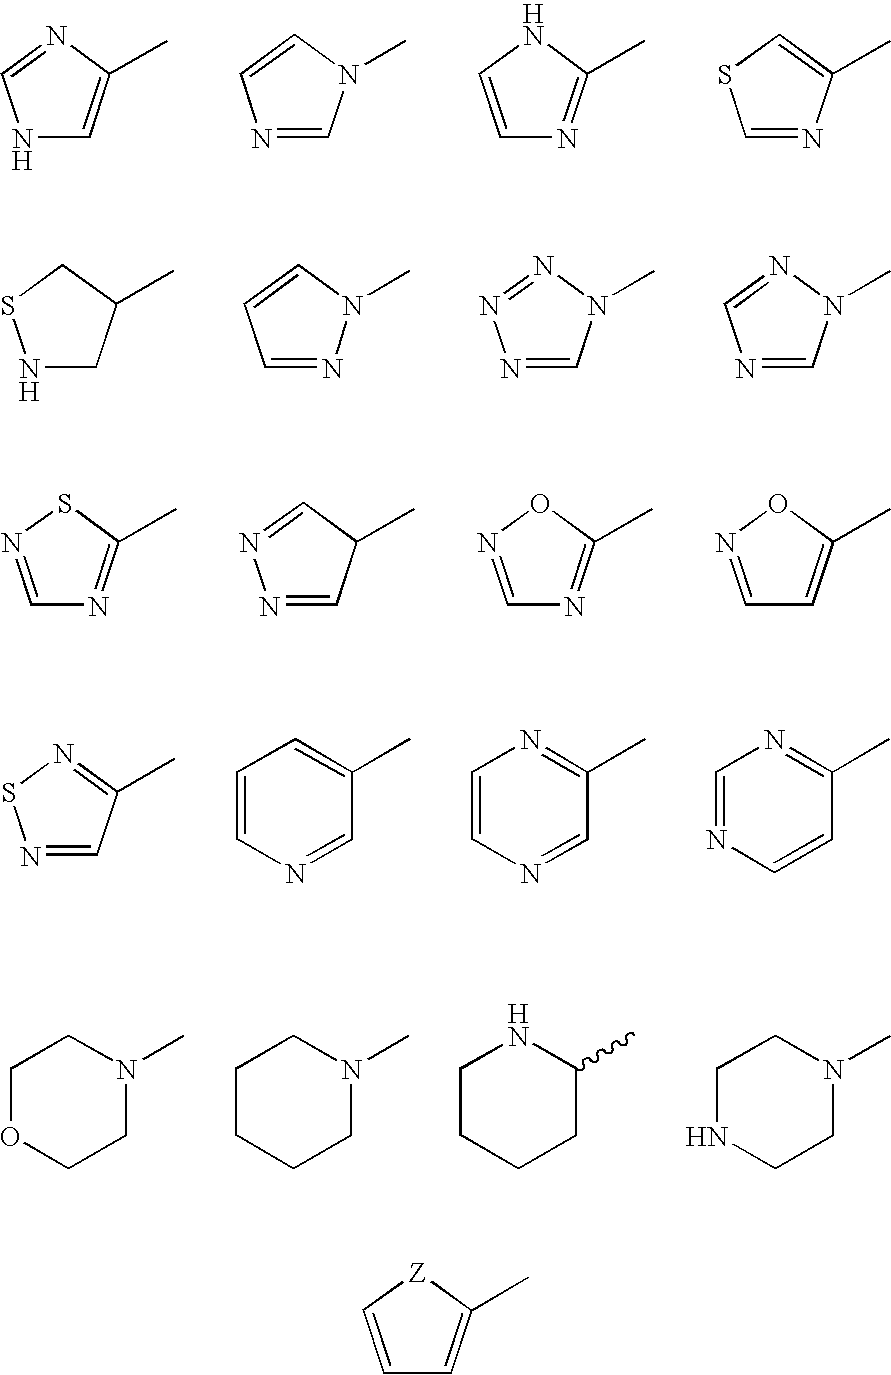 Derivatives of GLP-1 analogs